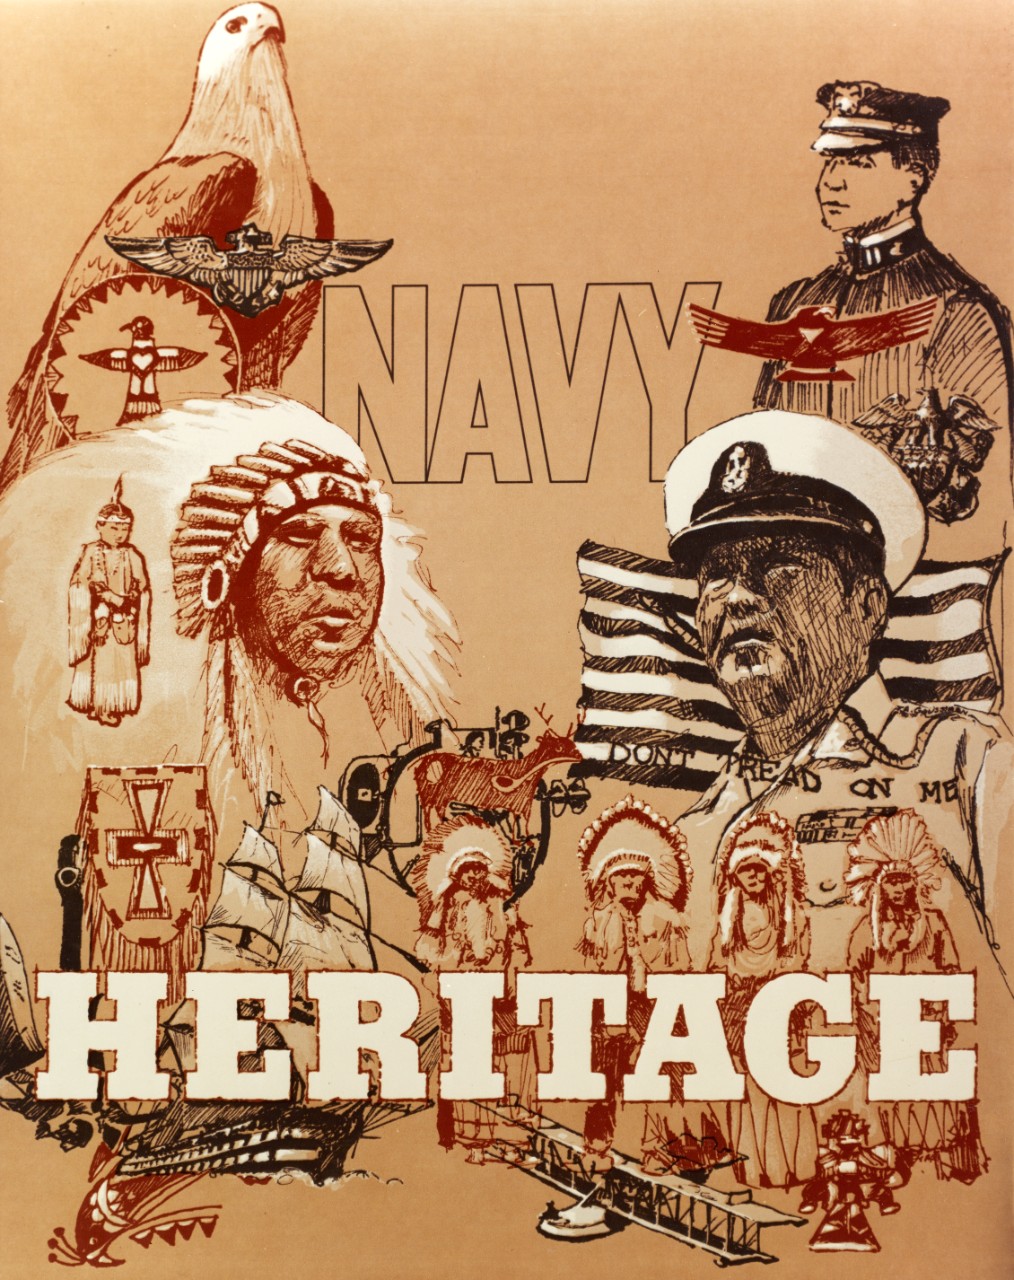 Recruiting Poster "Navy Heritage" by Timothy Gaussiran